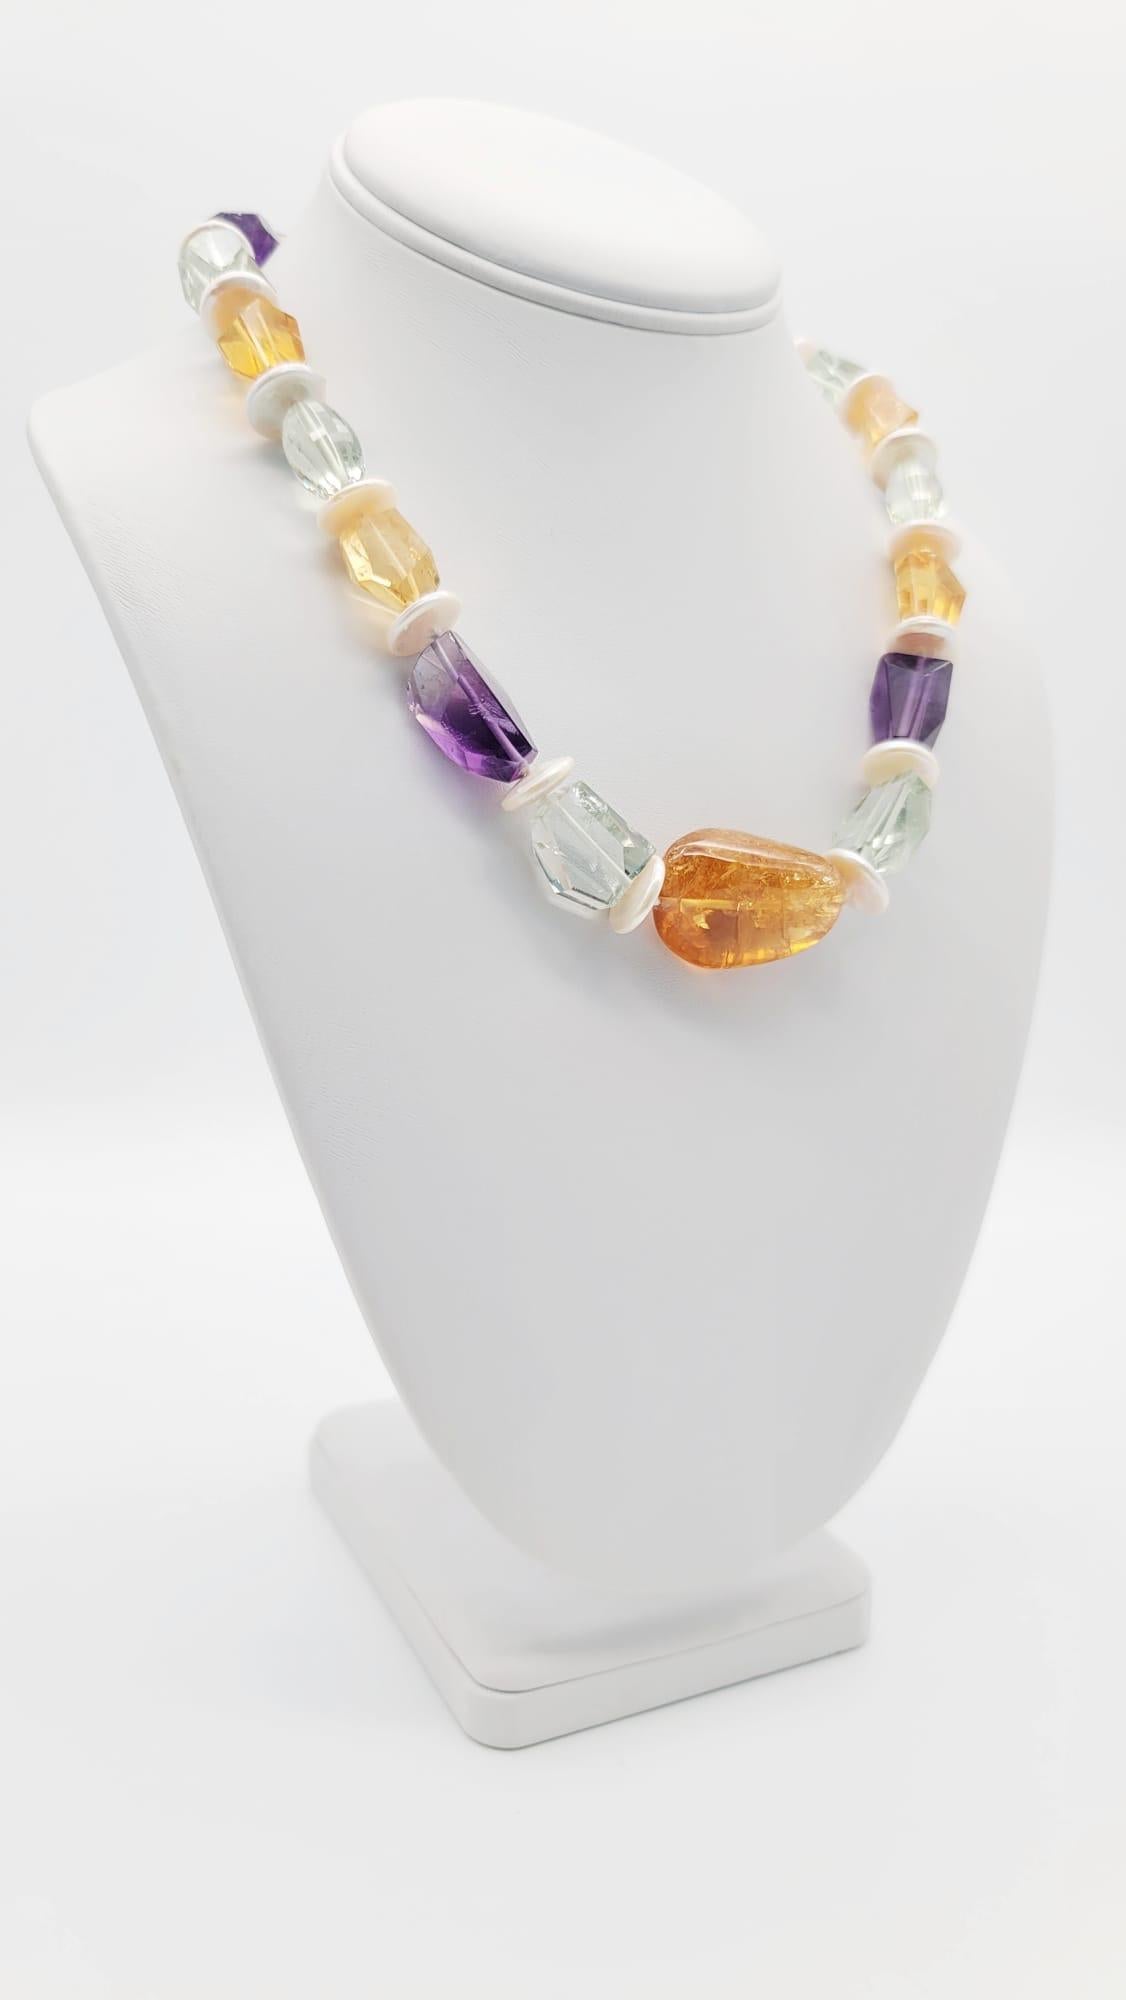 One-of-a-Kind

An amazing necklace combining a variety of colored Quartz in a melange of cuts to make an interesting flattering necklace, the center stone is a polished Citrine. Surrounded by hexagonally cut and polished Green and Purple Amethysts,